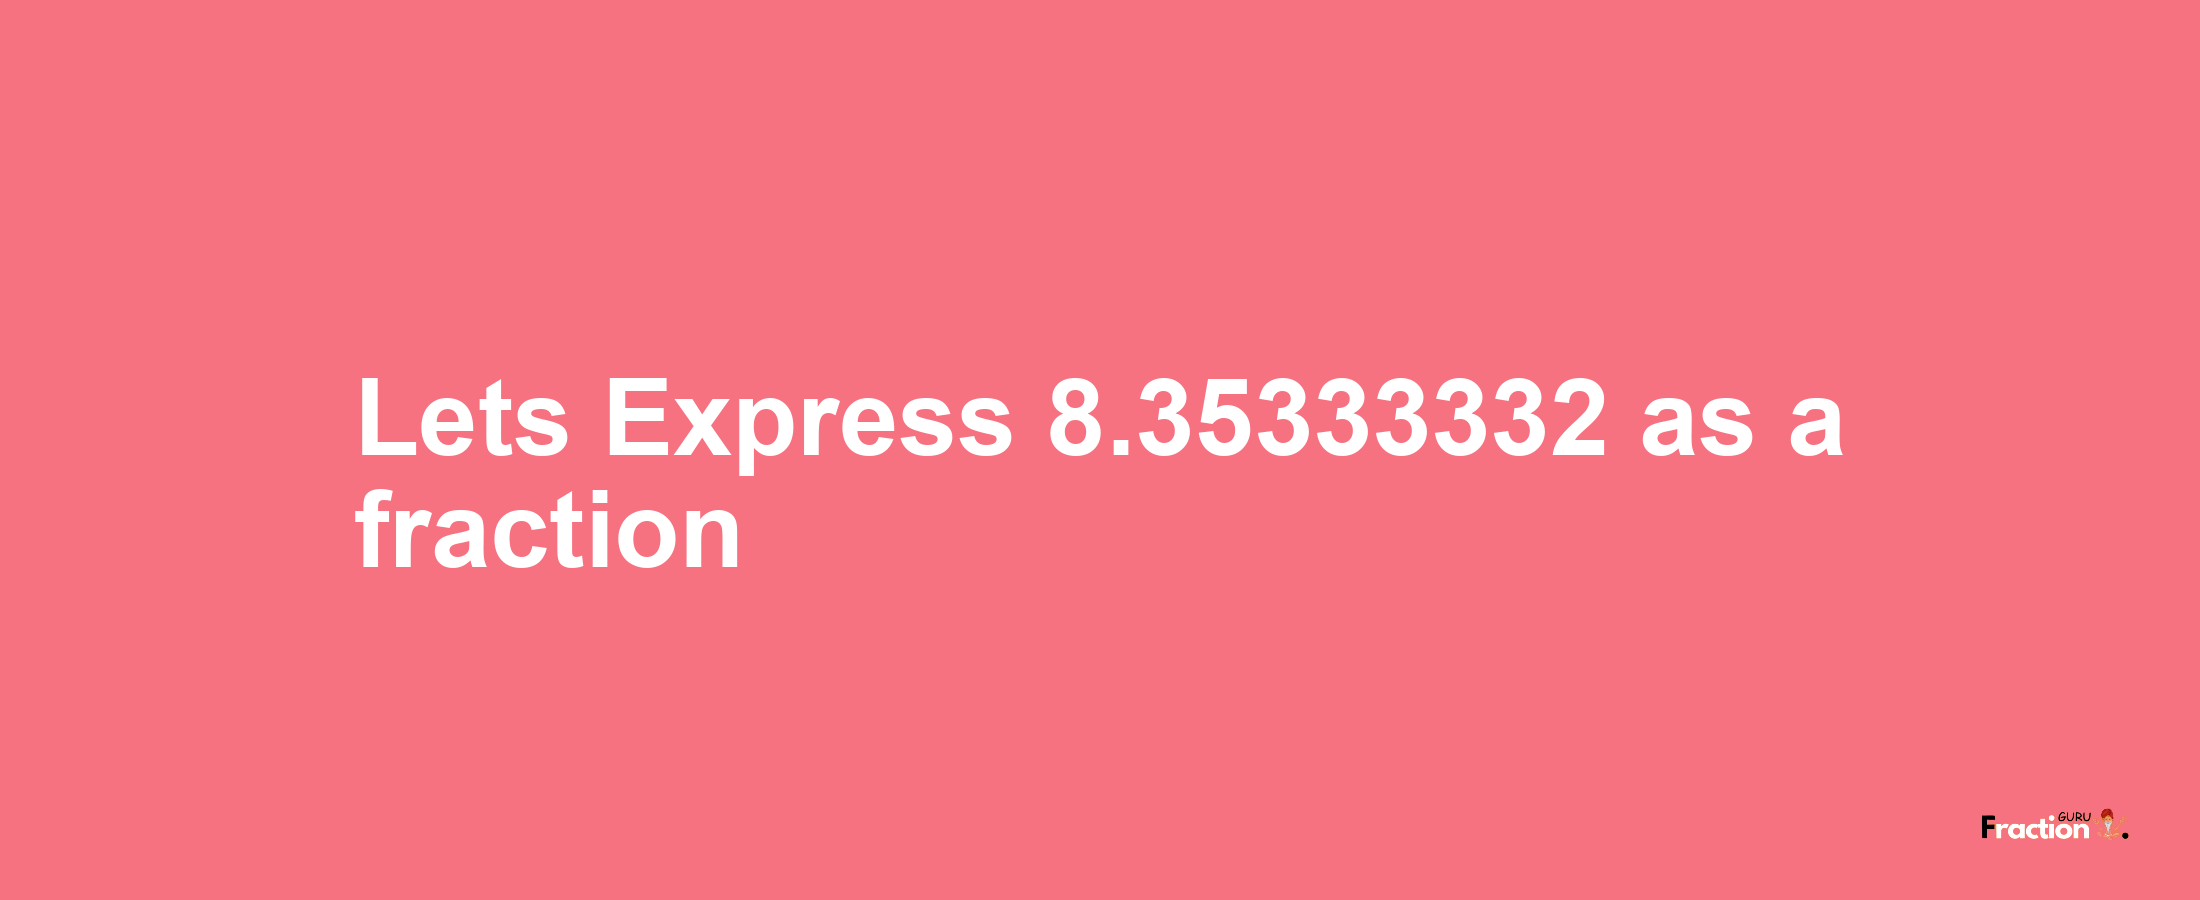 Lets Express 8.35333332 as afraction